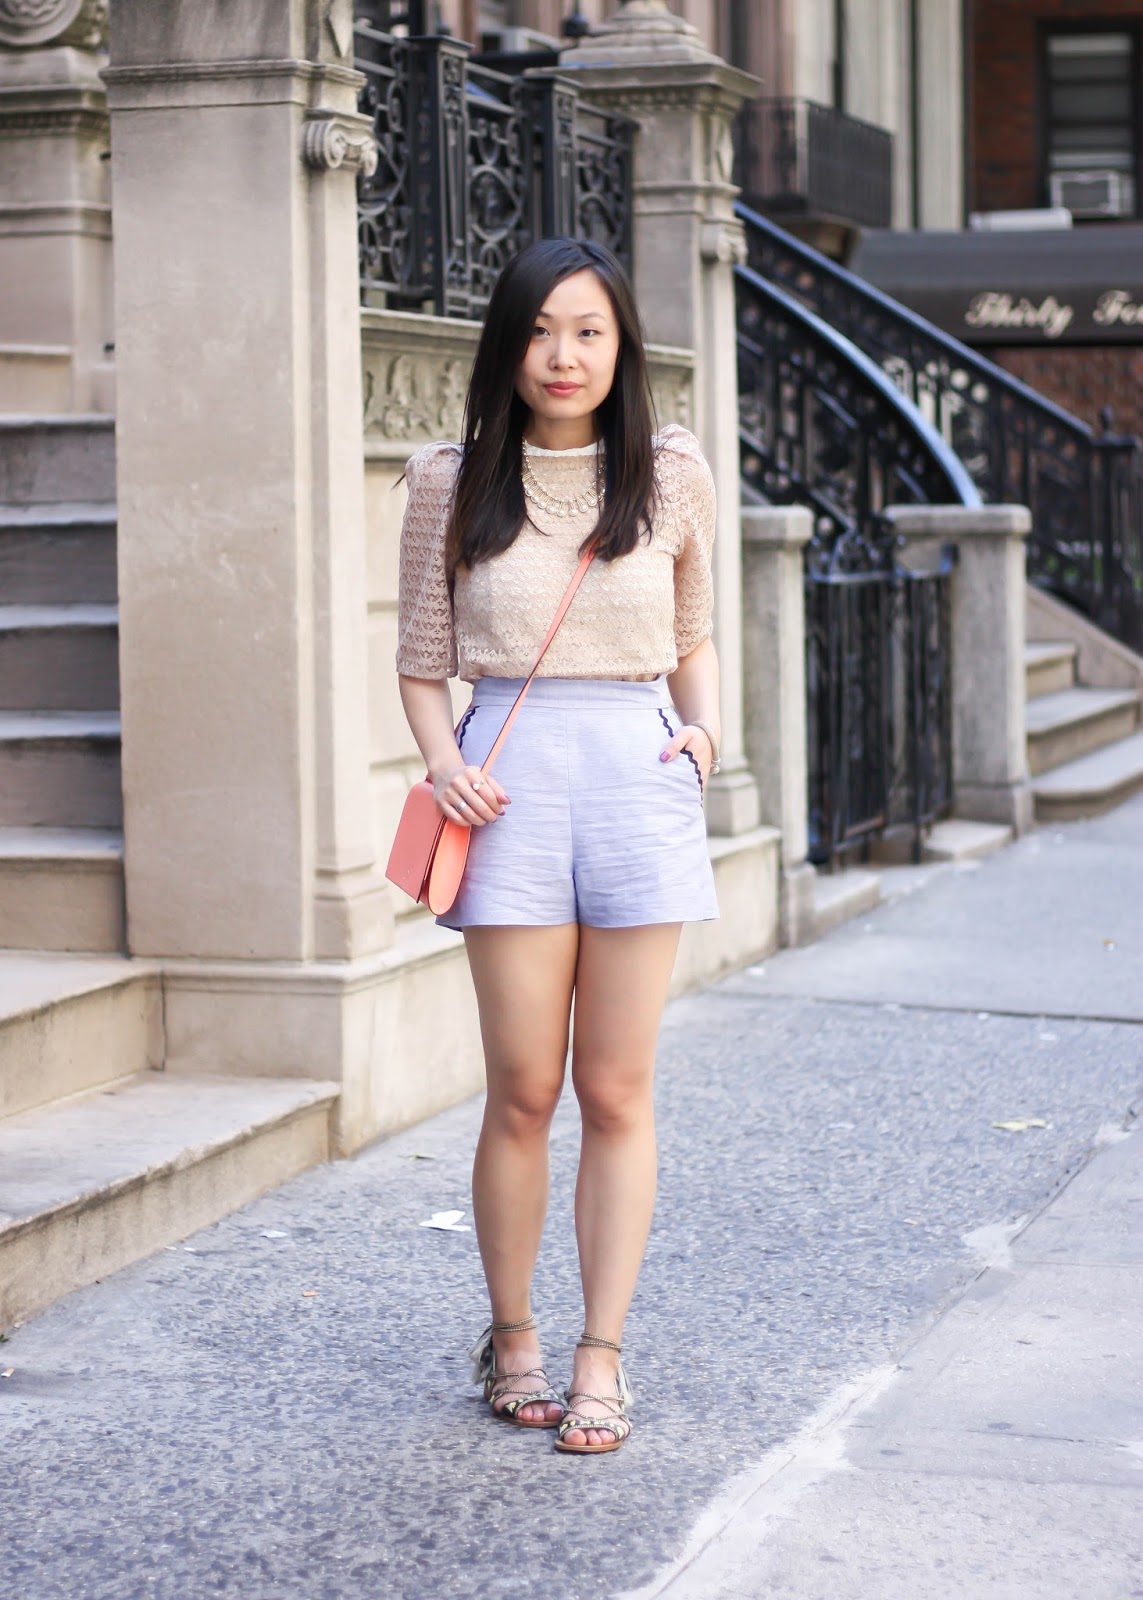 High-Waist Summer Shorts and Lace Top